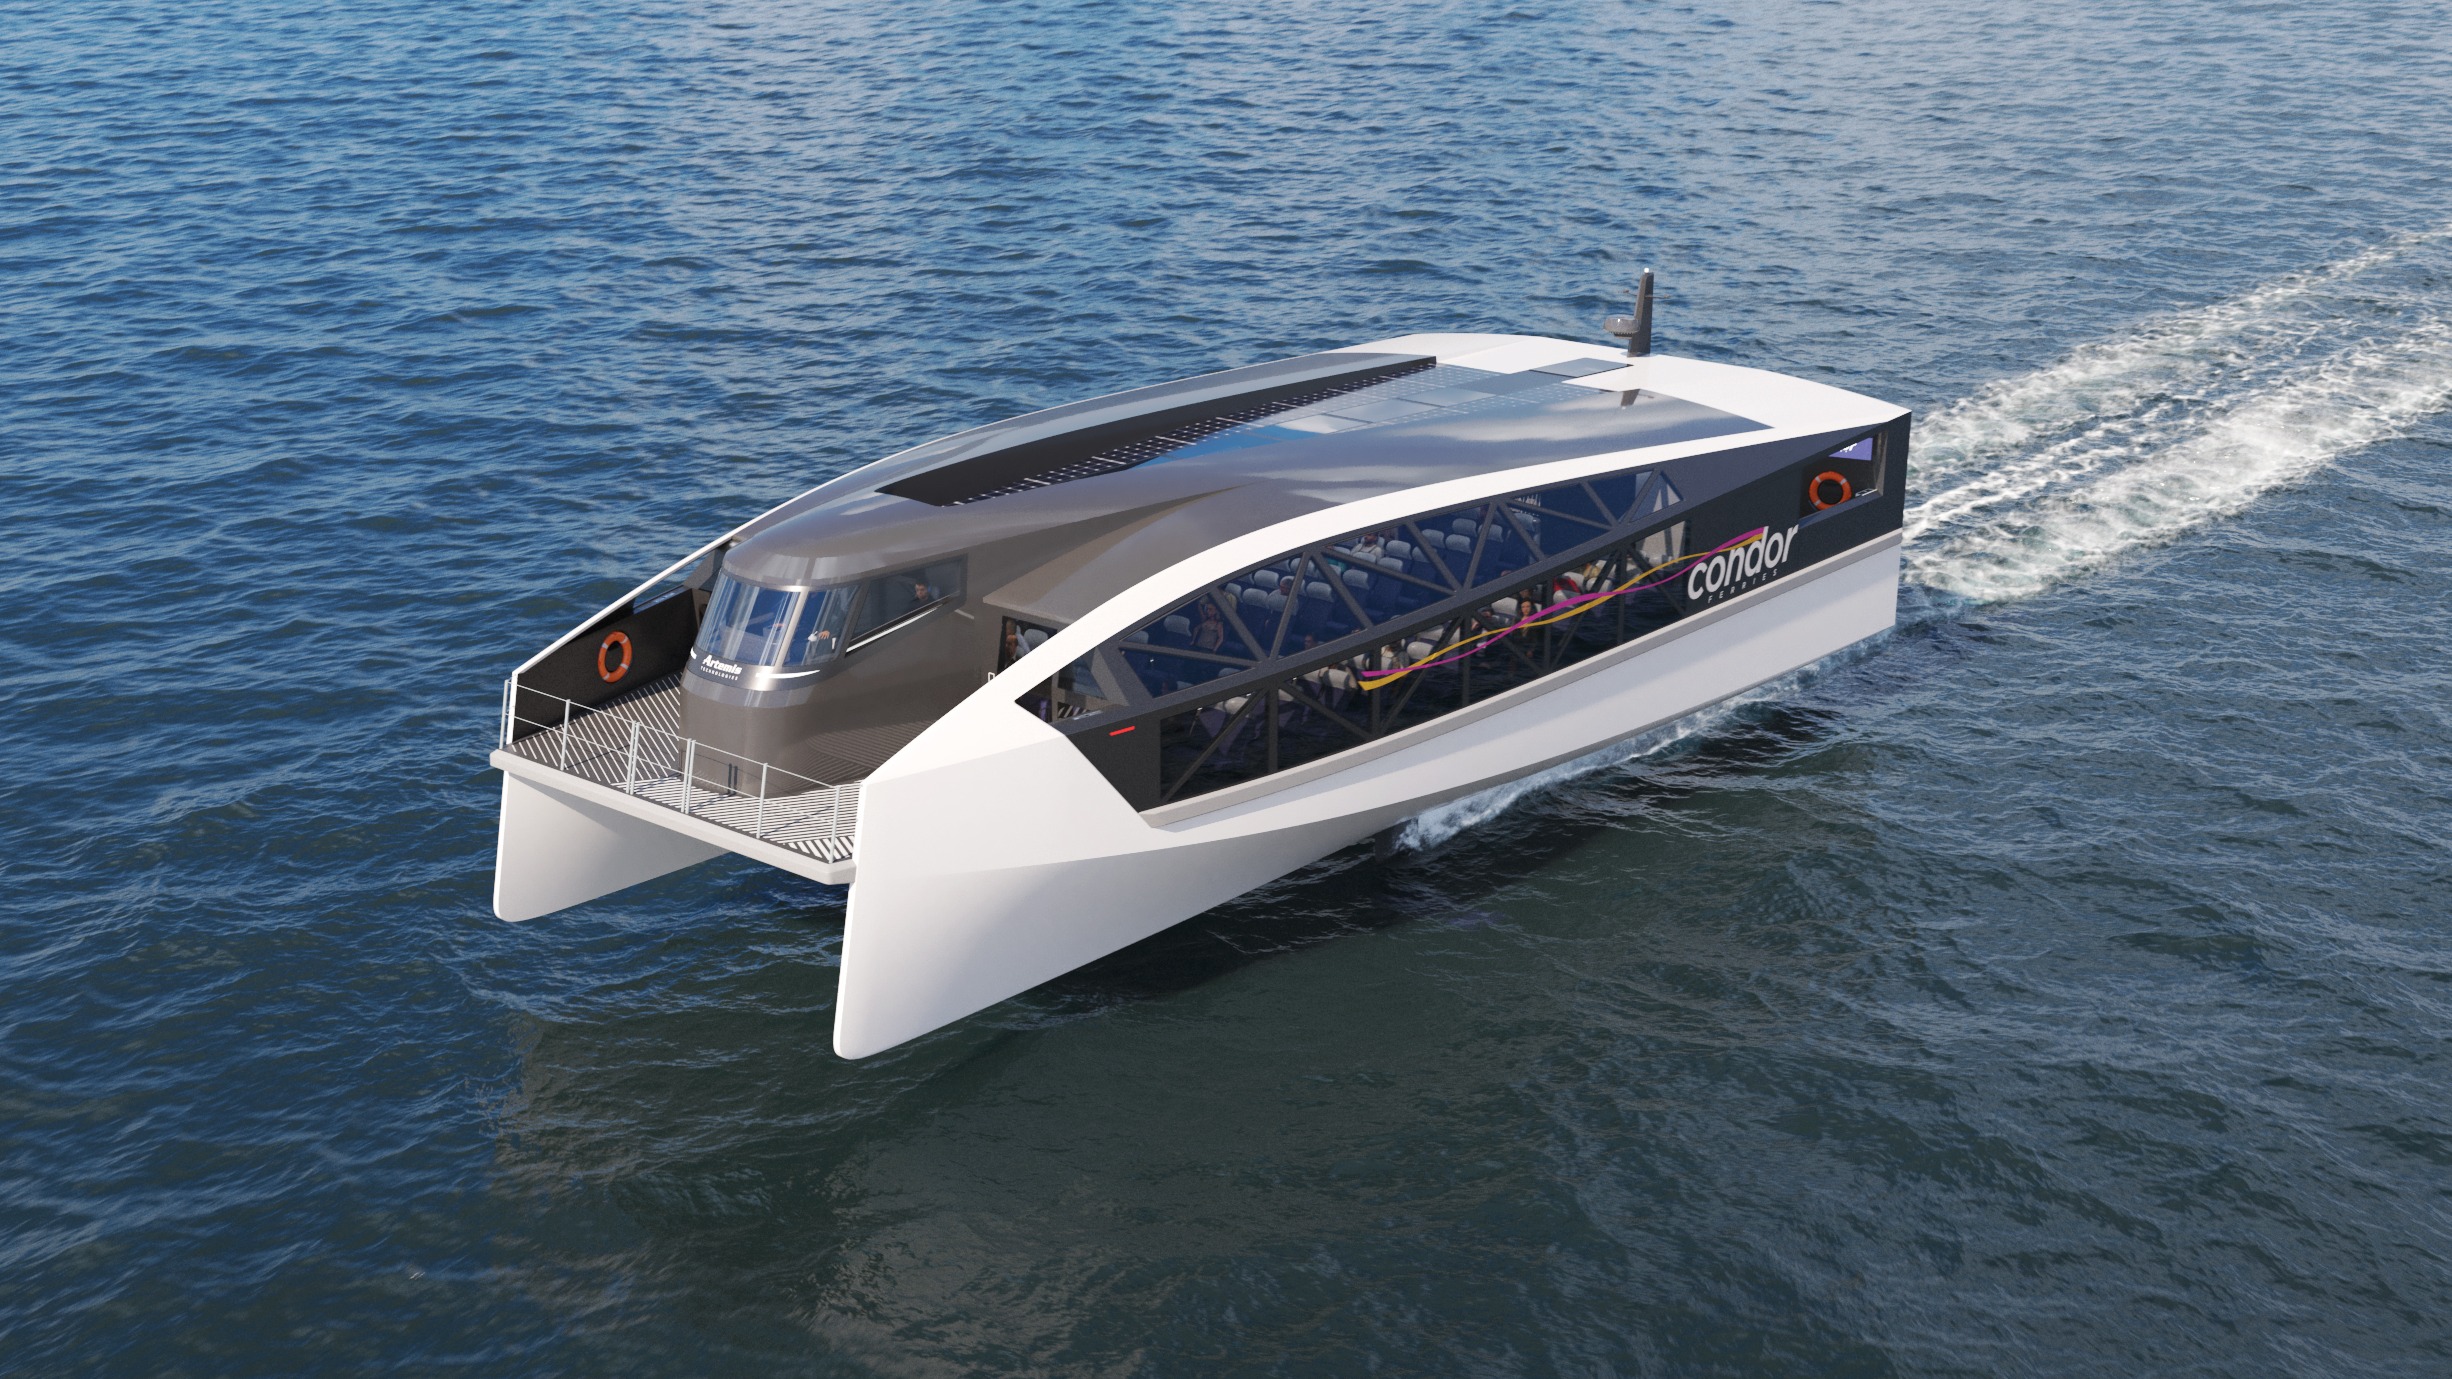 Condor unveils new design for 100 electric ferry due to begin sea